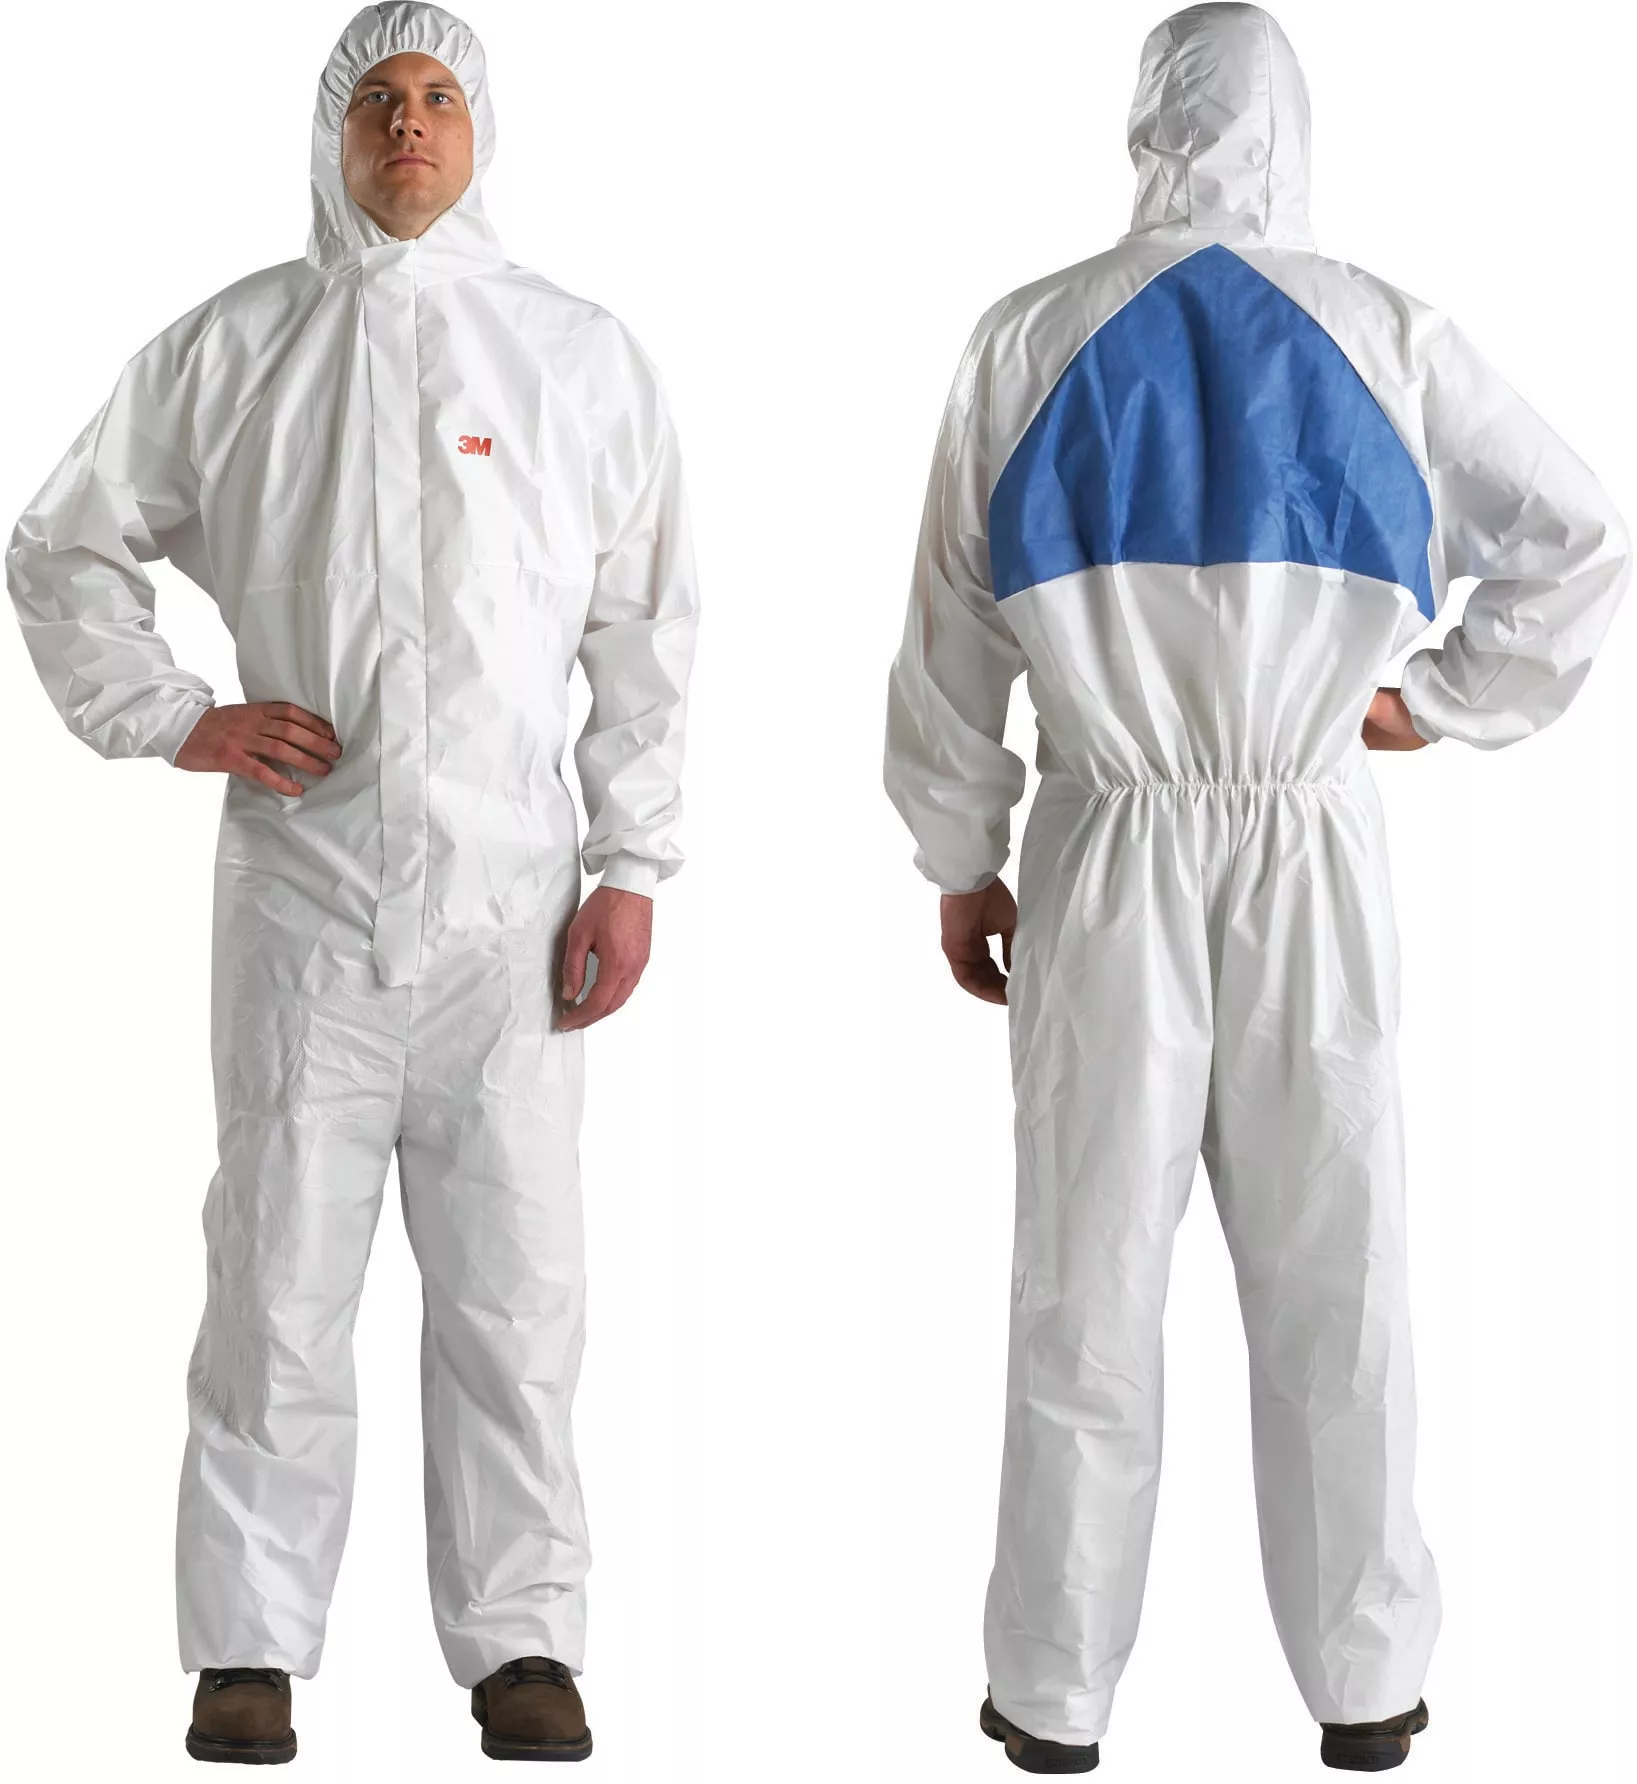 3M™ Disposable Protective Coverall 4540+-XXL White/Blue MIV Type 5/6, 20
EA/Case